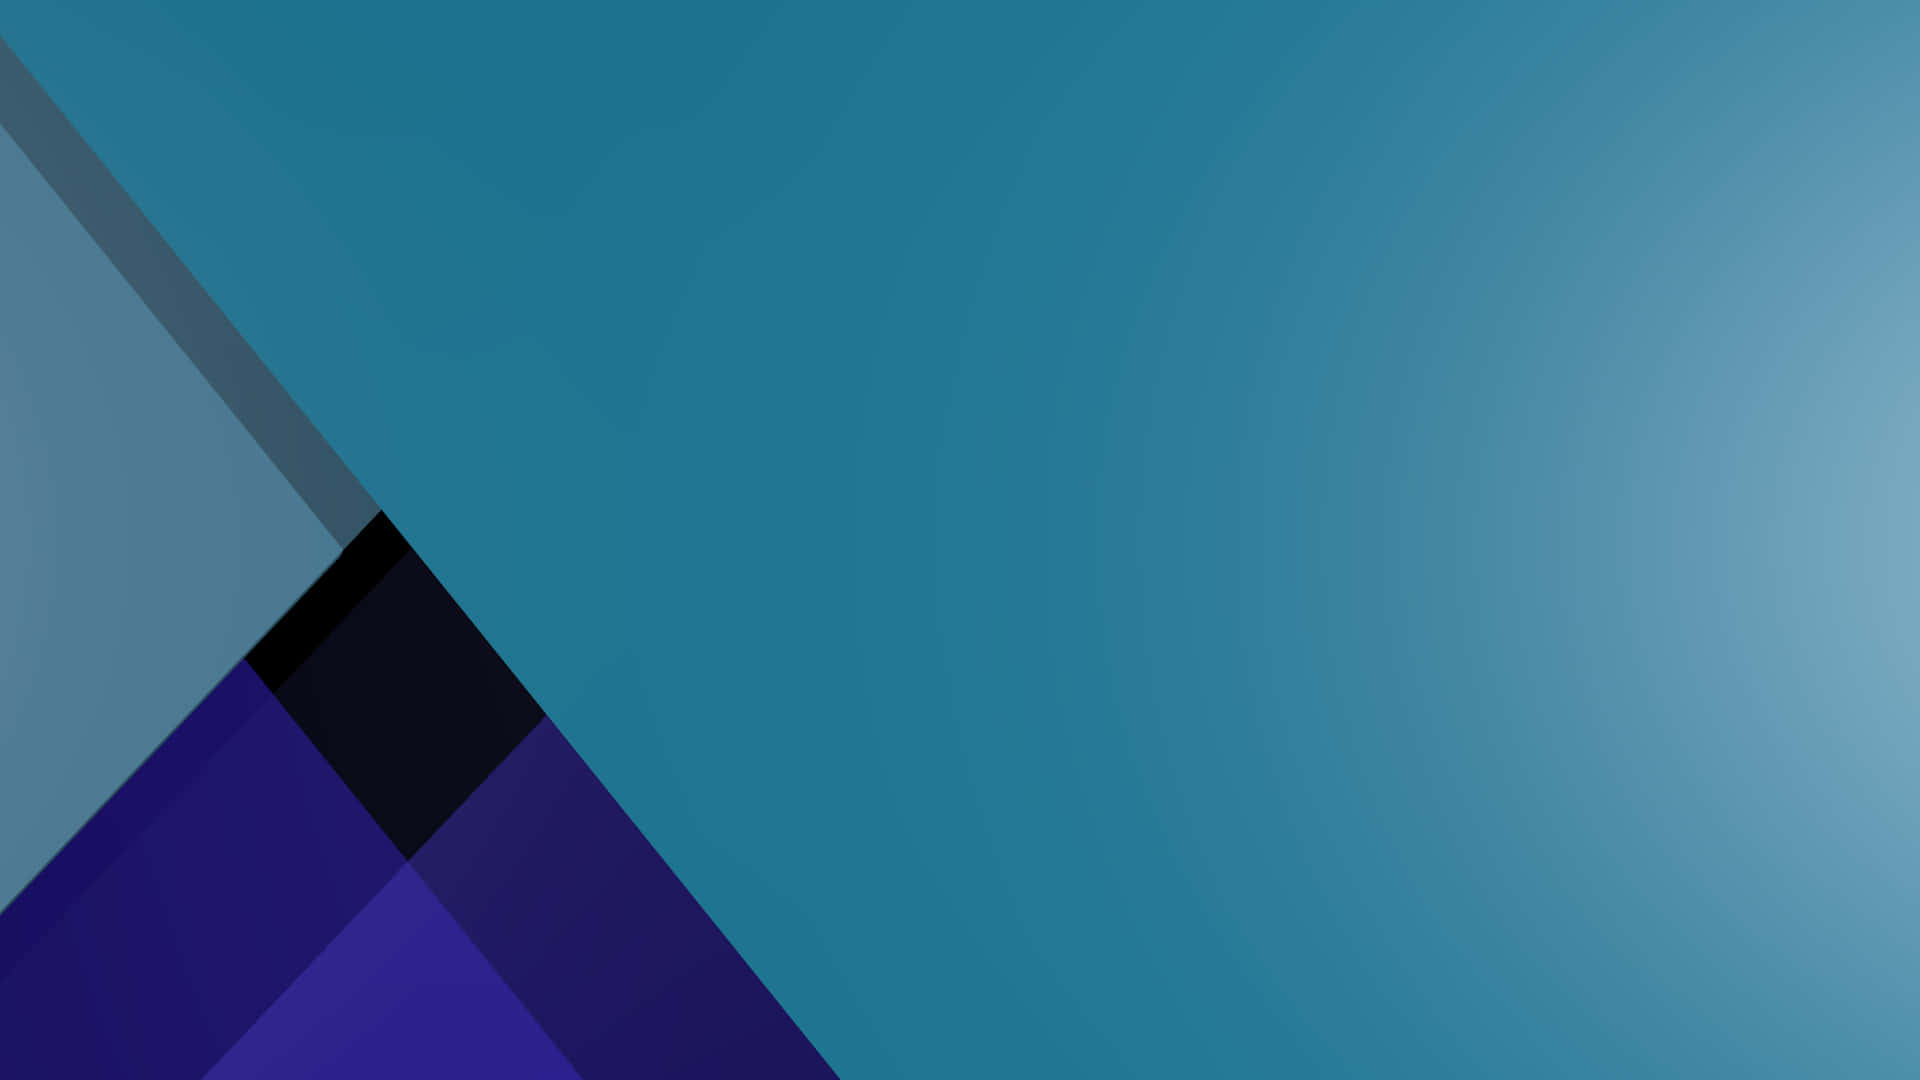 A Blue And Black Triangle With A Blue Background Wallpaper